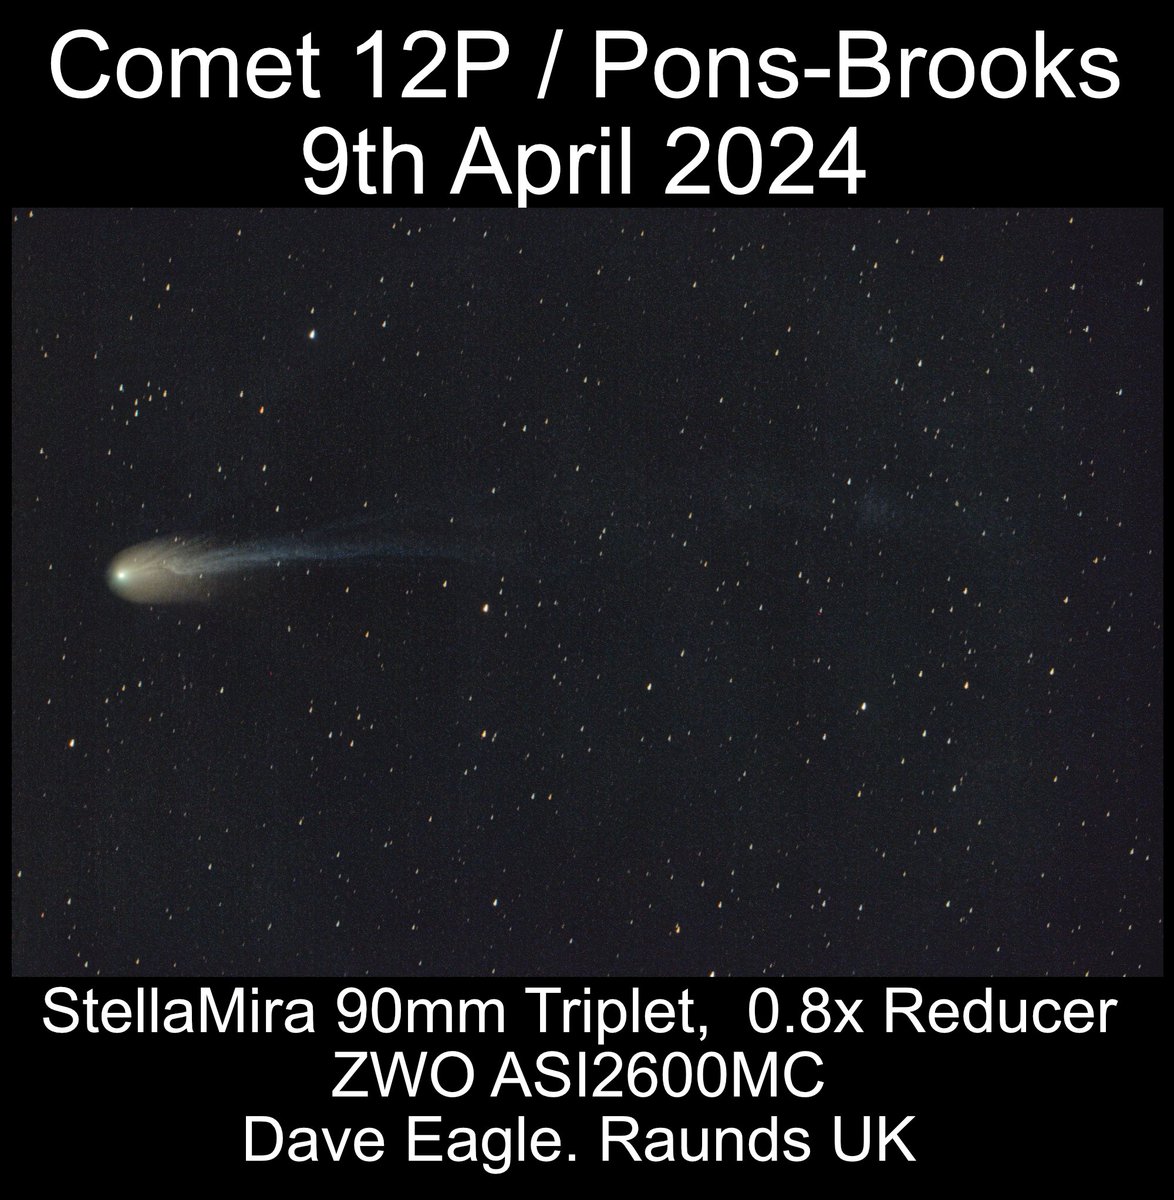 This evening's comet showing. Now located to the lower right of Jupiter in the western evening twilight.